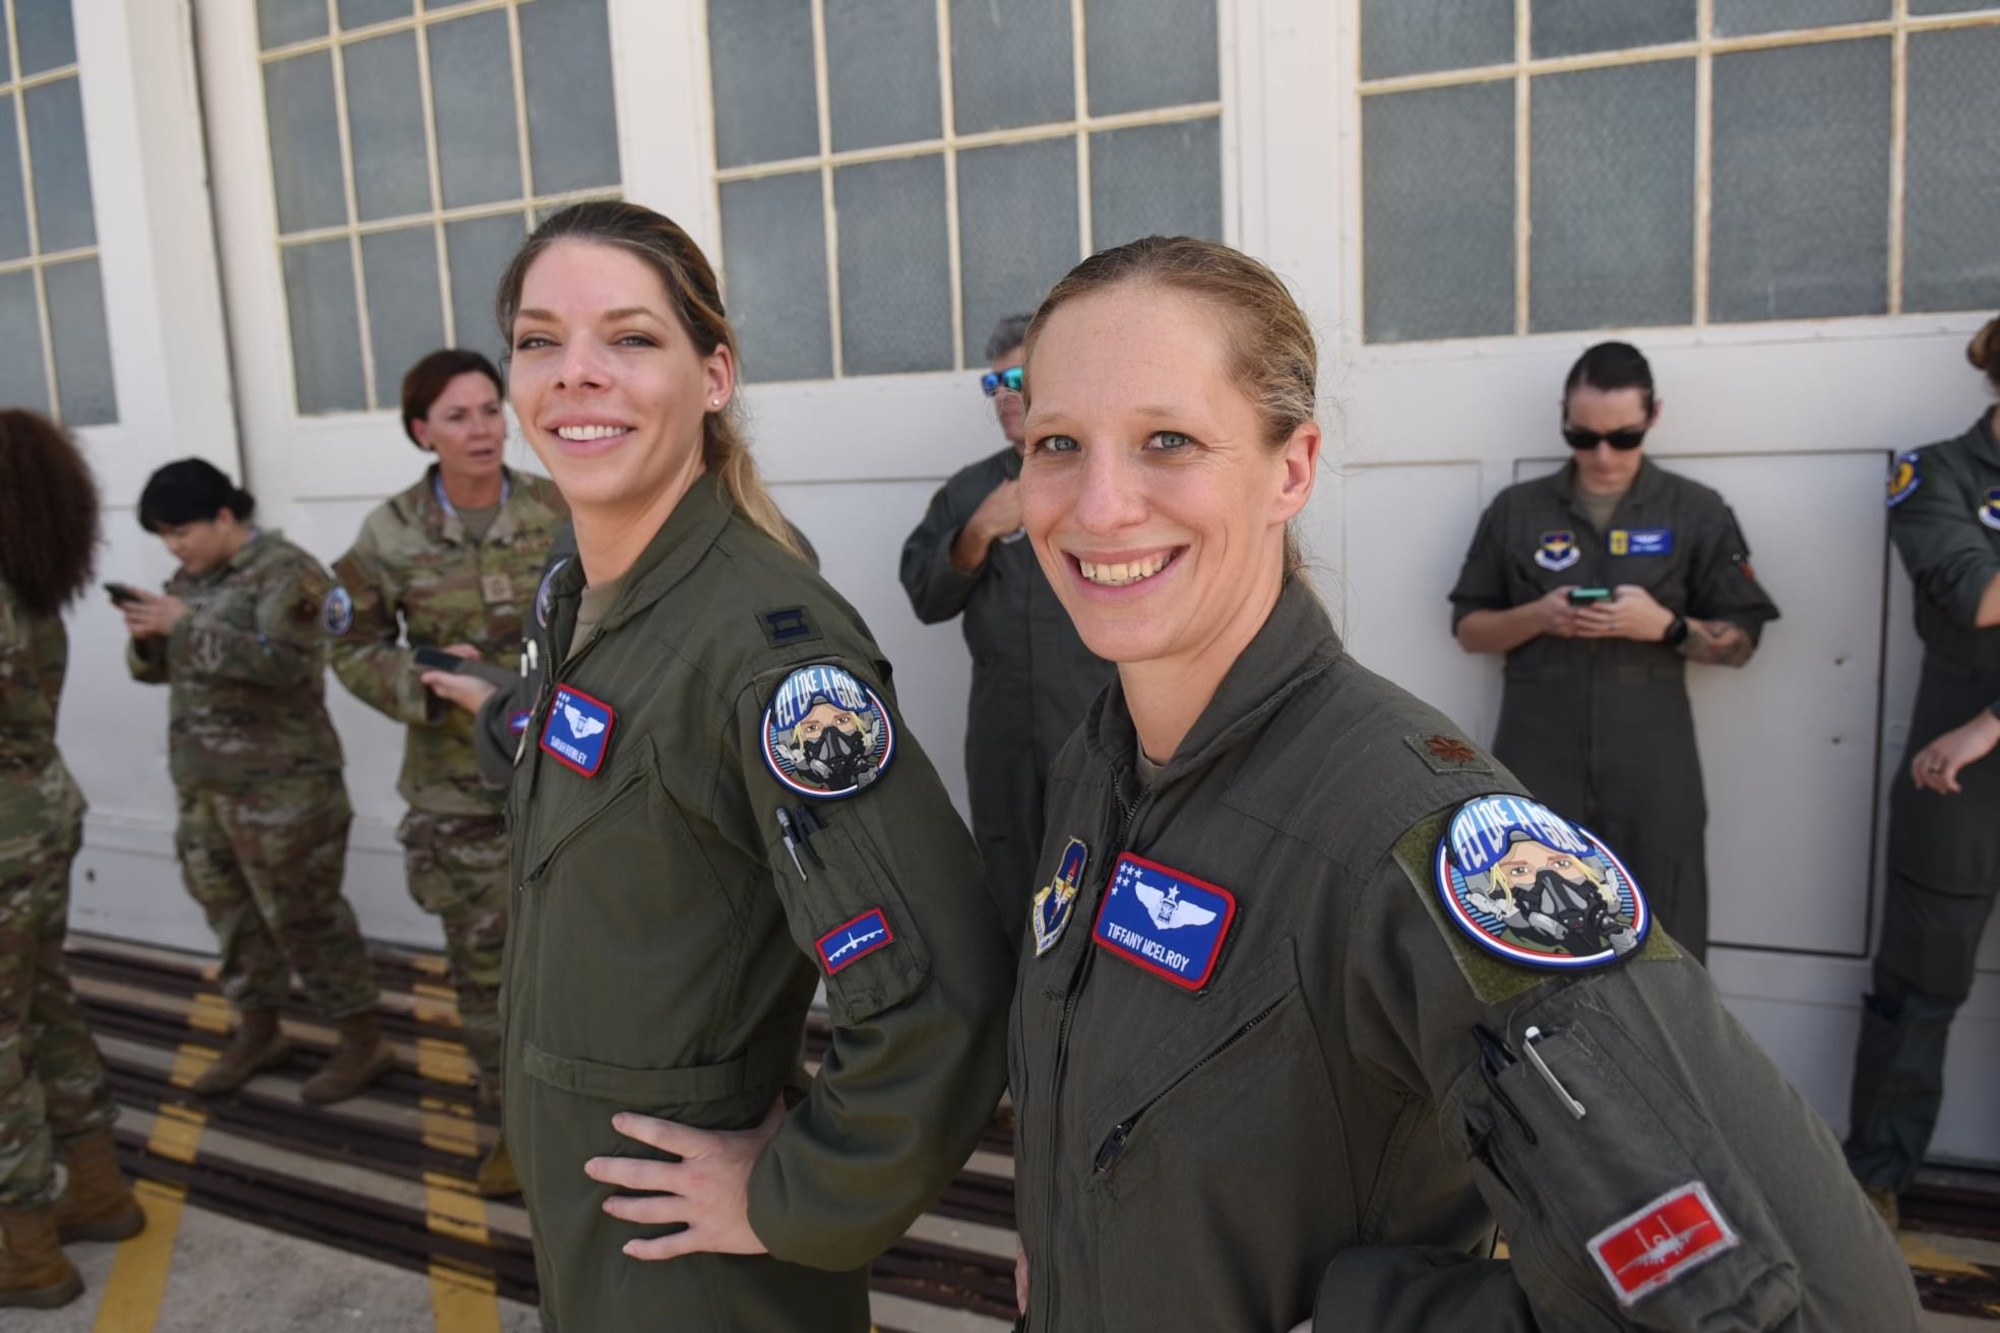 Two women in flight suits pose together, showing off their "Fly Like a Girl" patches.